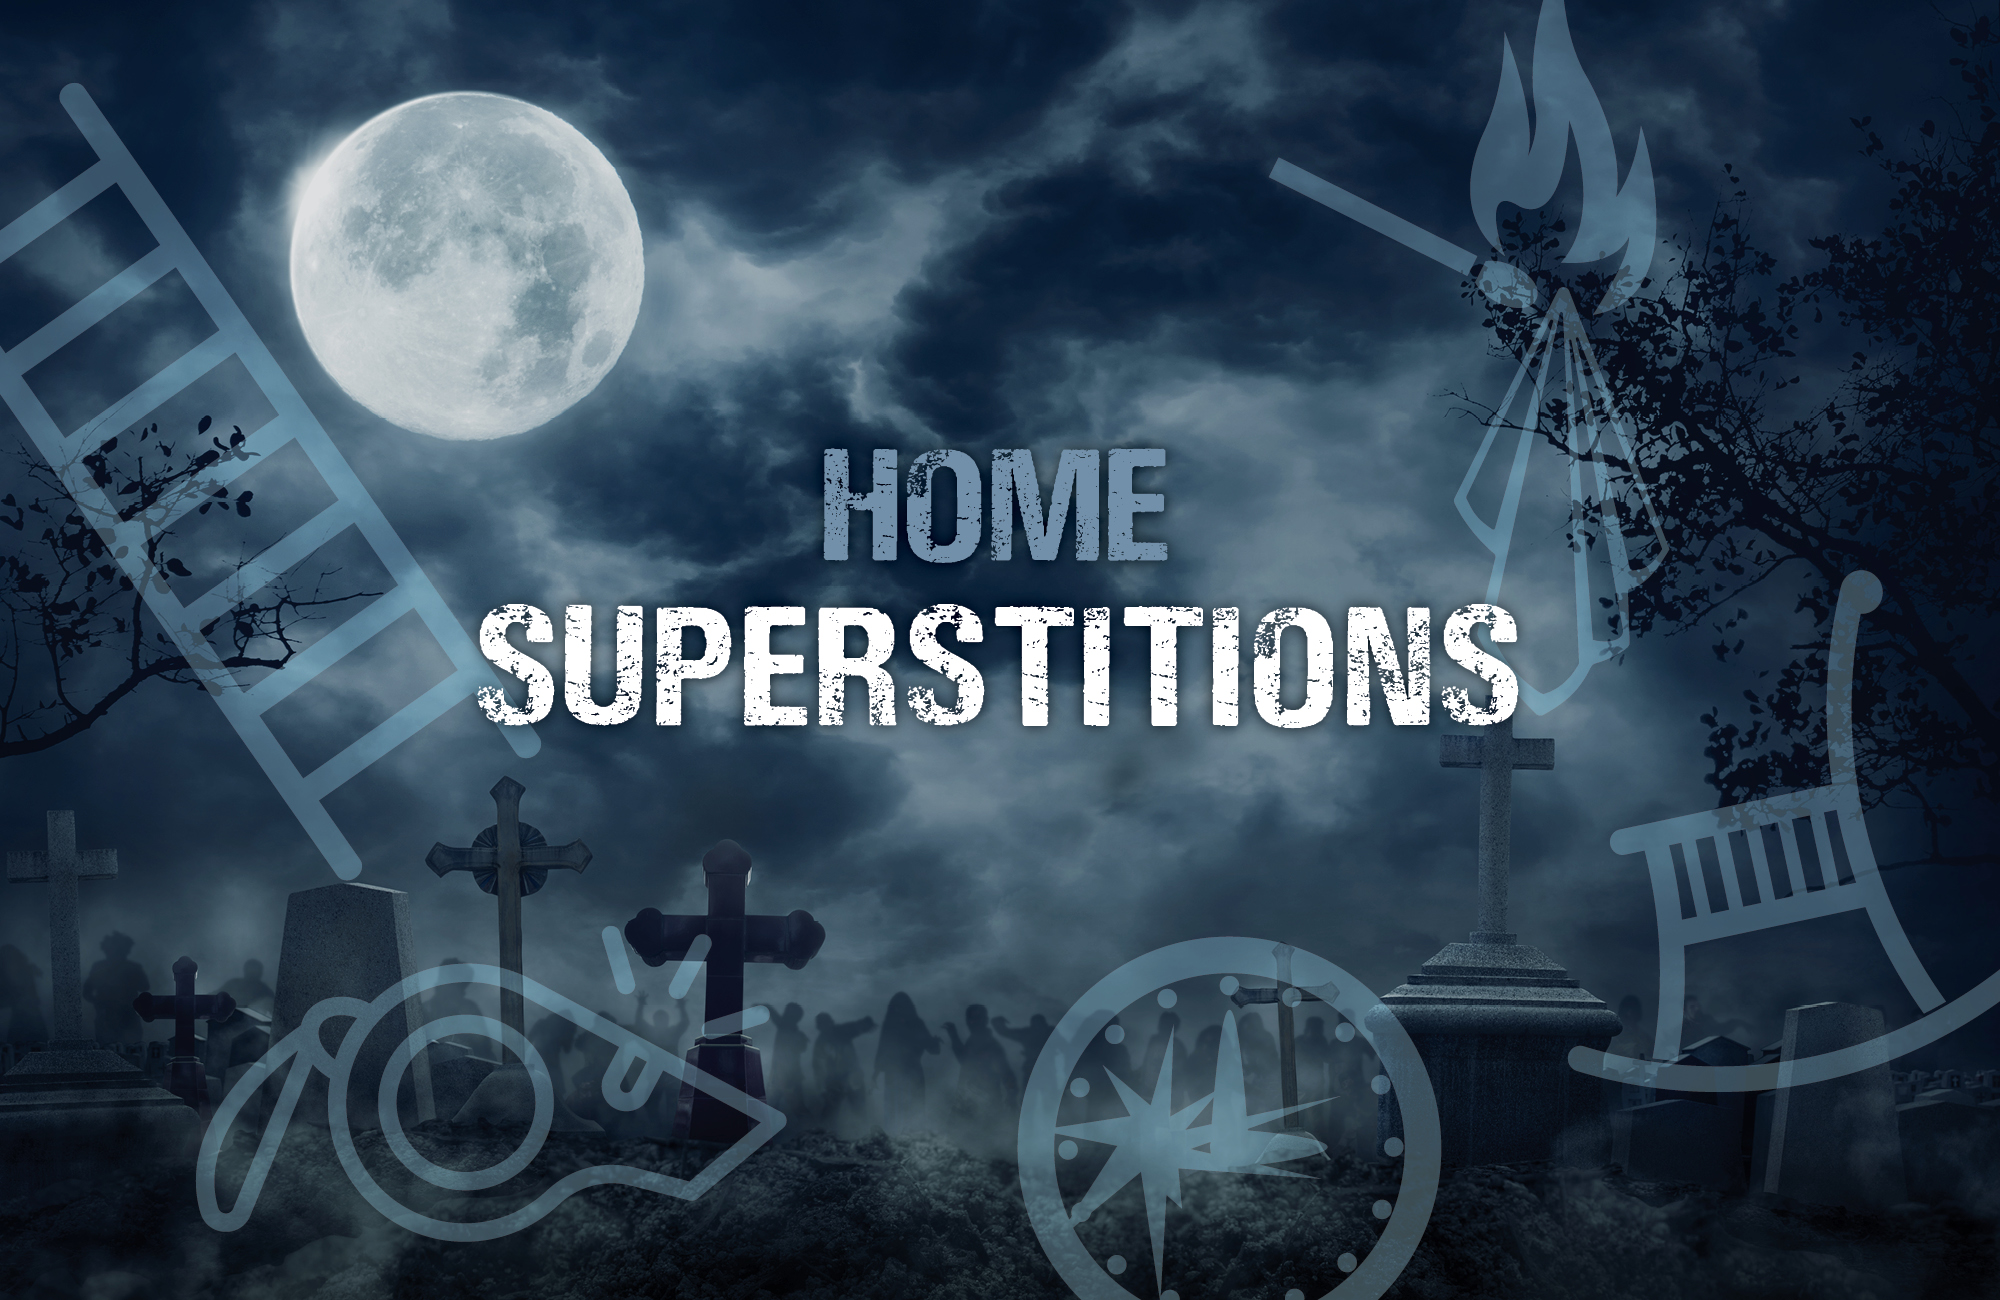 13 Spooky Home Superstitions to Avoid